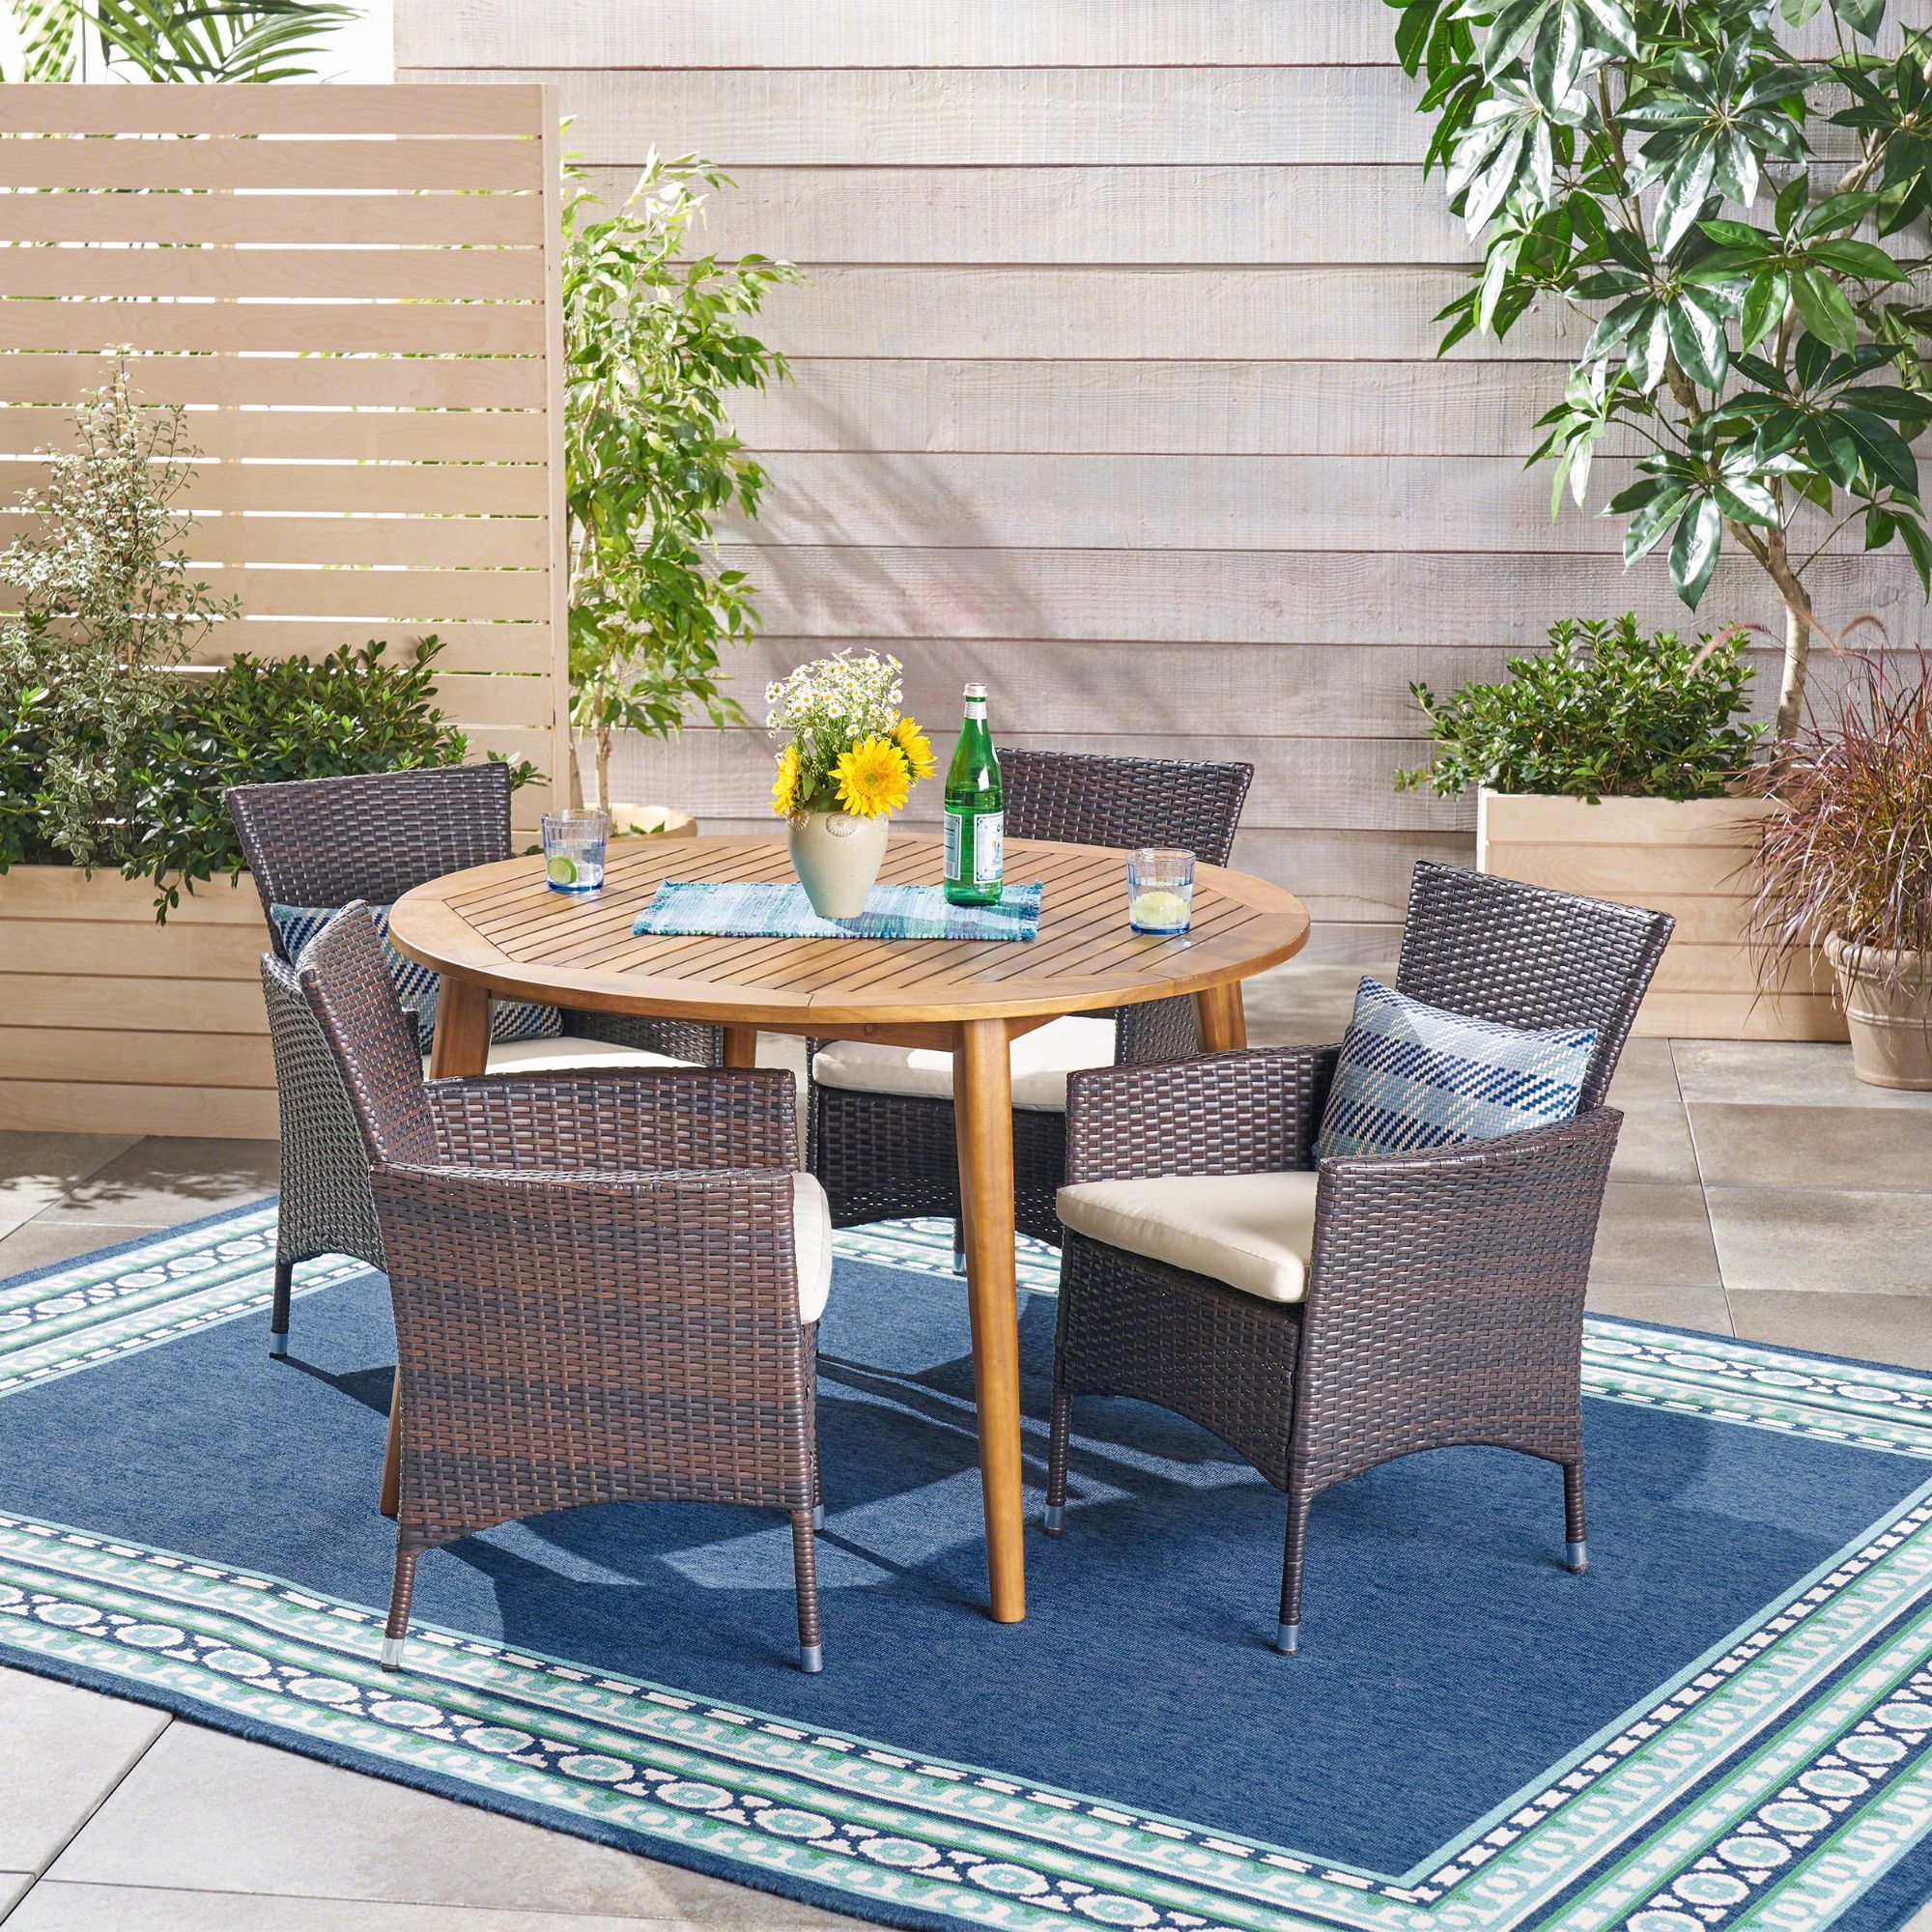 5 Piece Brown Wicker Finish Round Outdoor Furniture Patio Dining Set With 2020 Round 5 Piece Outdoor Patio Dining Sets (View 2 of 15)